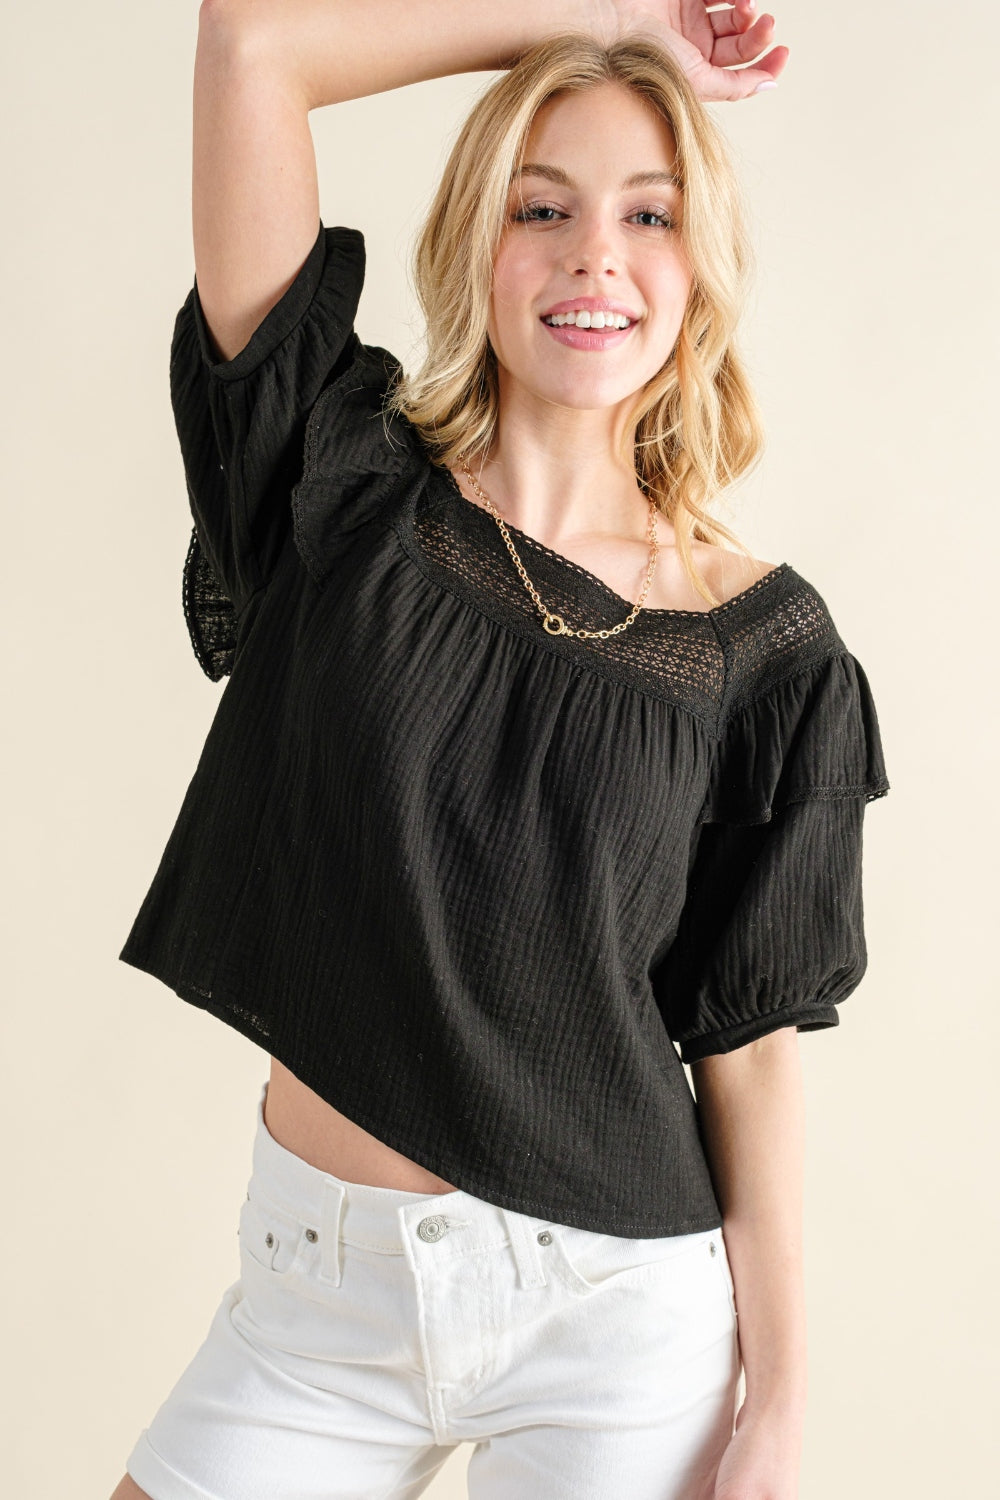 This Square Neck Cotton Gauze Ruffled Blouse is a feminine and chic piece that adds a touch of elegance to any outfit. The square neckline creates a flattering silhouette, while the ruffled details add a soft and romantic touch. Made with lightweight cotton gauze fabric, it is perfect for staying cool and comfortable during warm weather.  S - XL